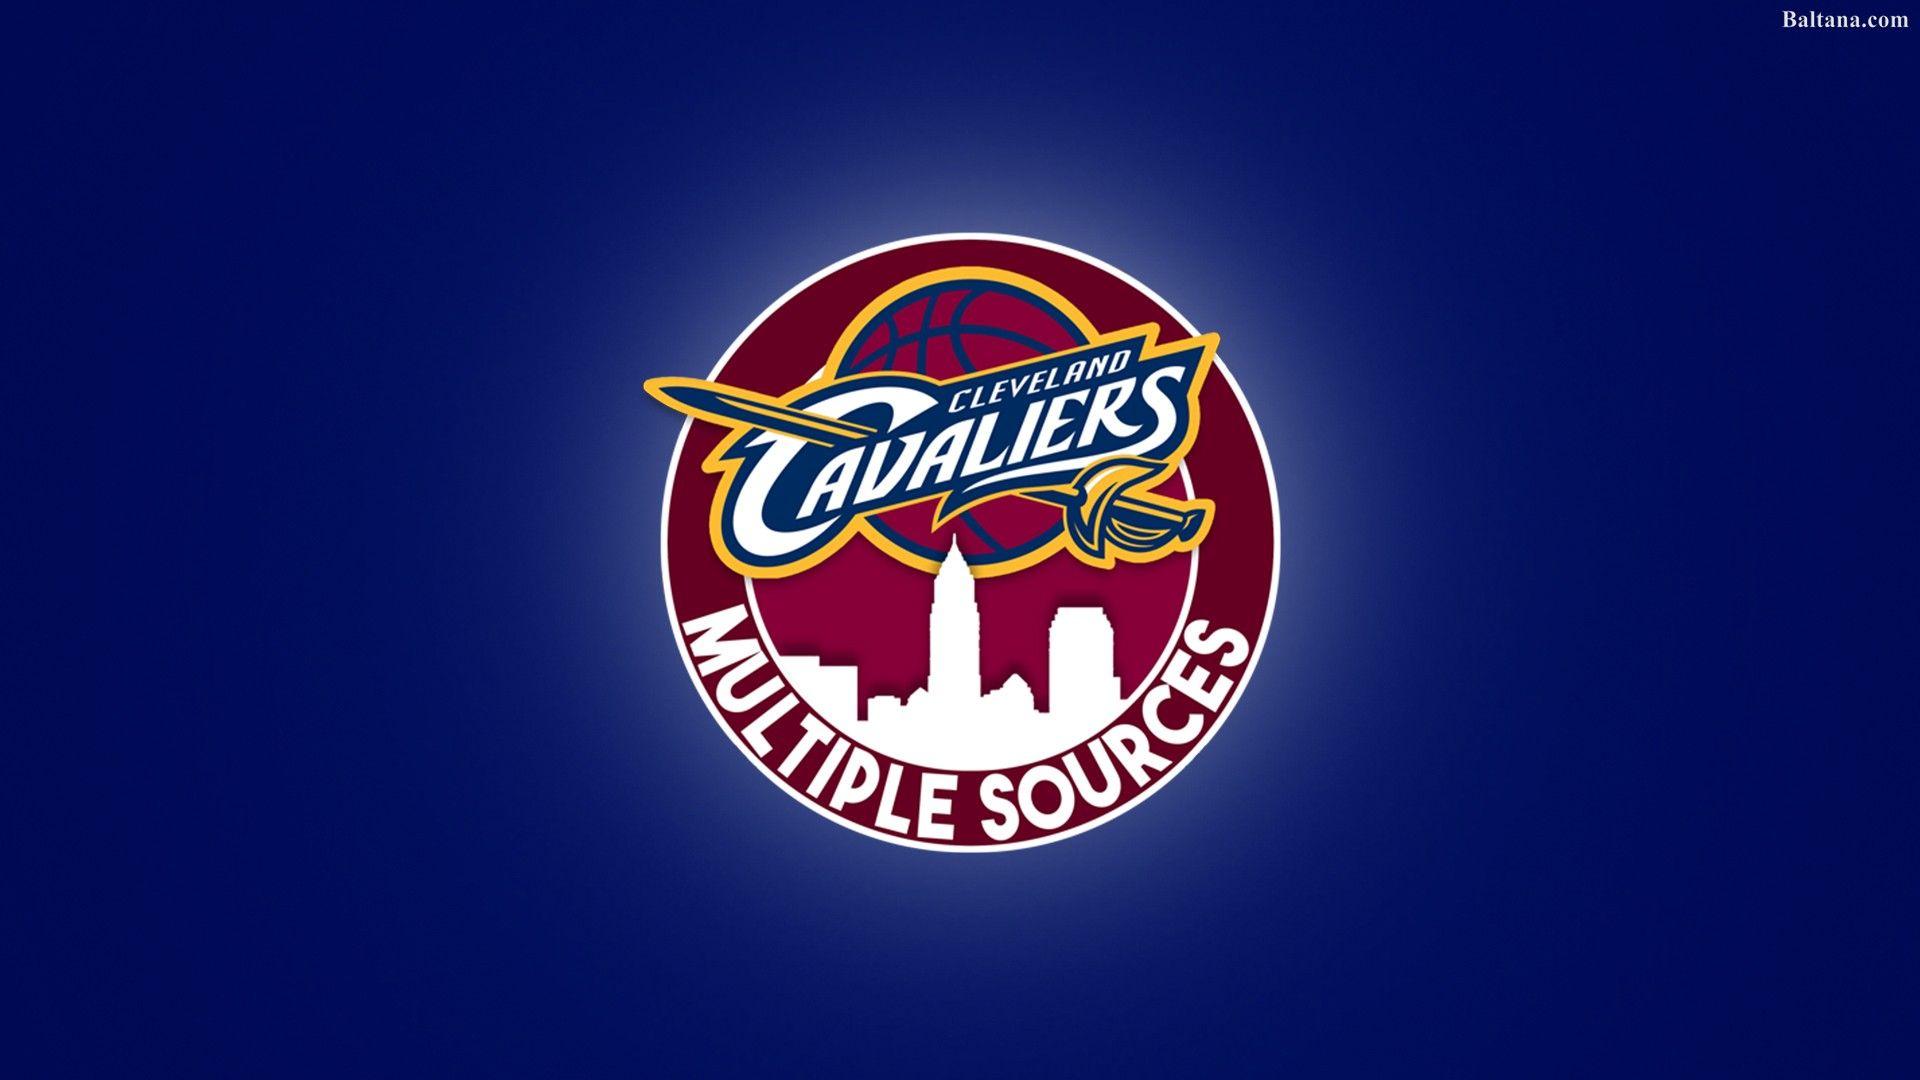 Cleveland Cavaliers Wallpaper HD Background, Image, Pics, Photo